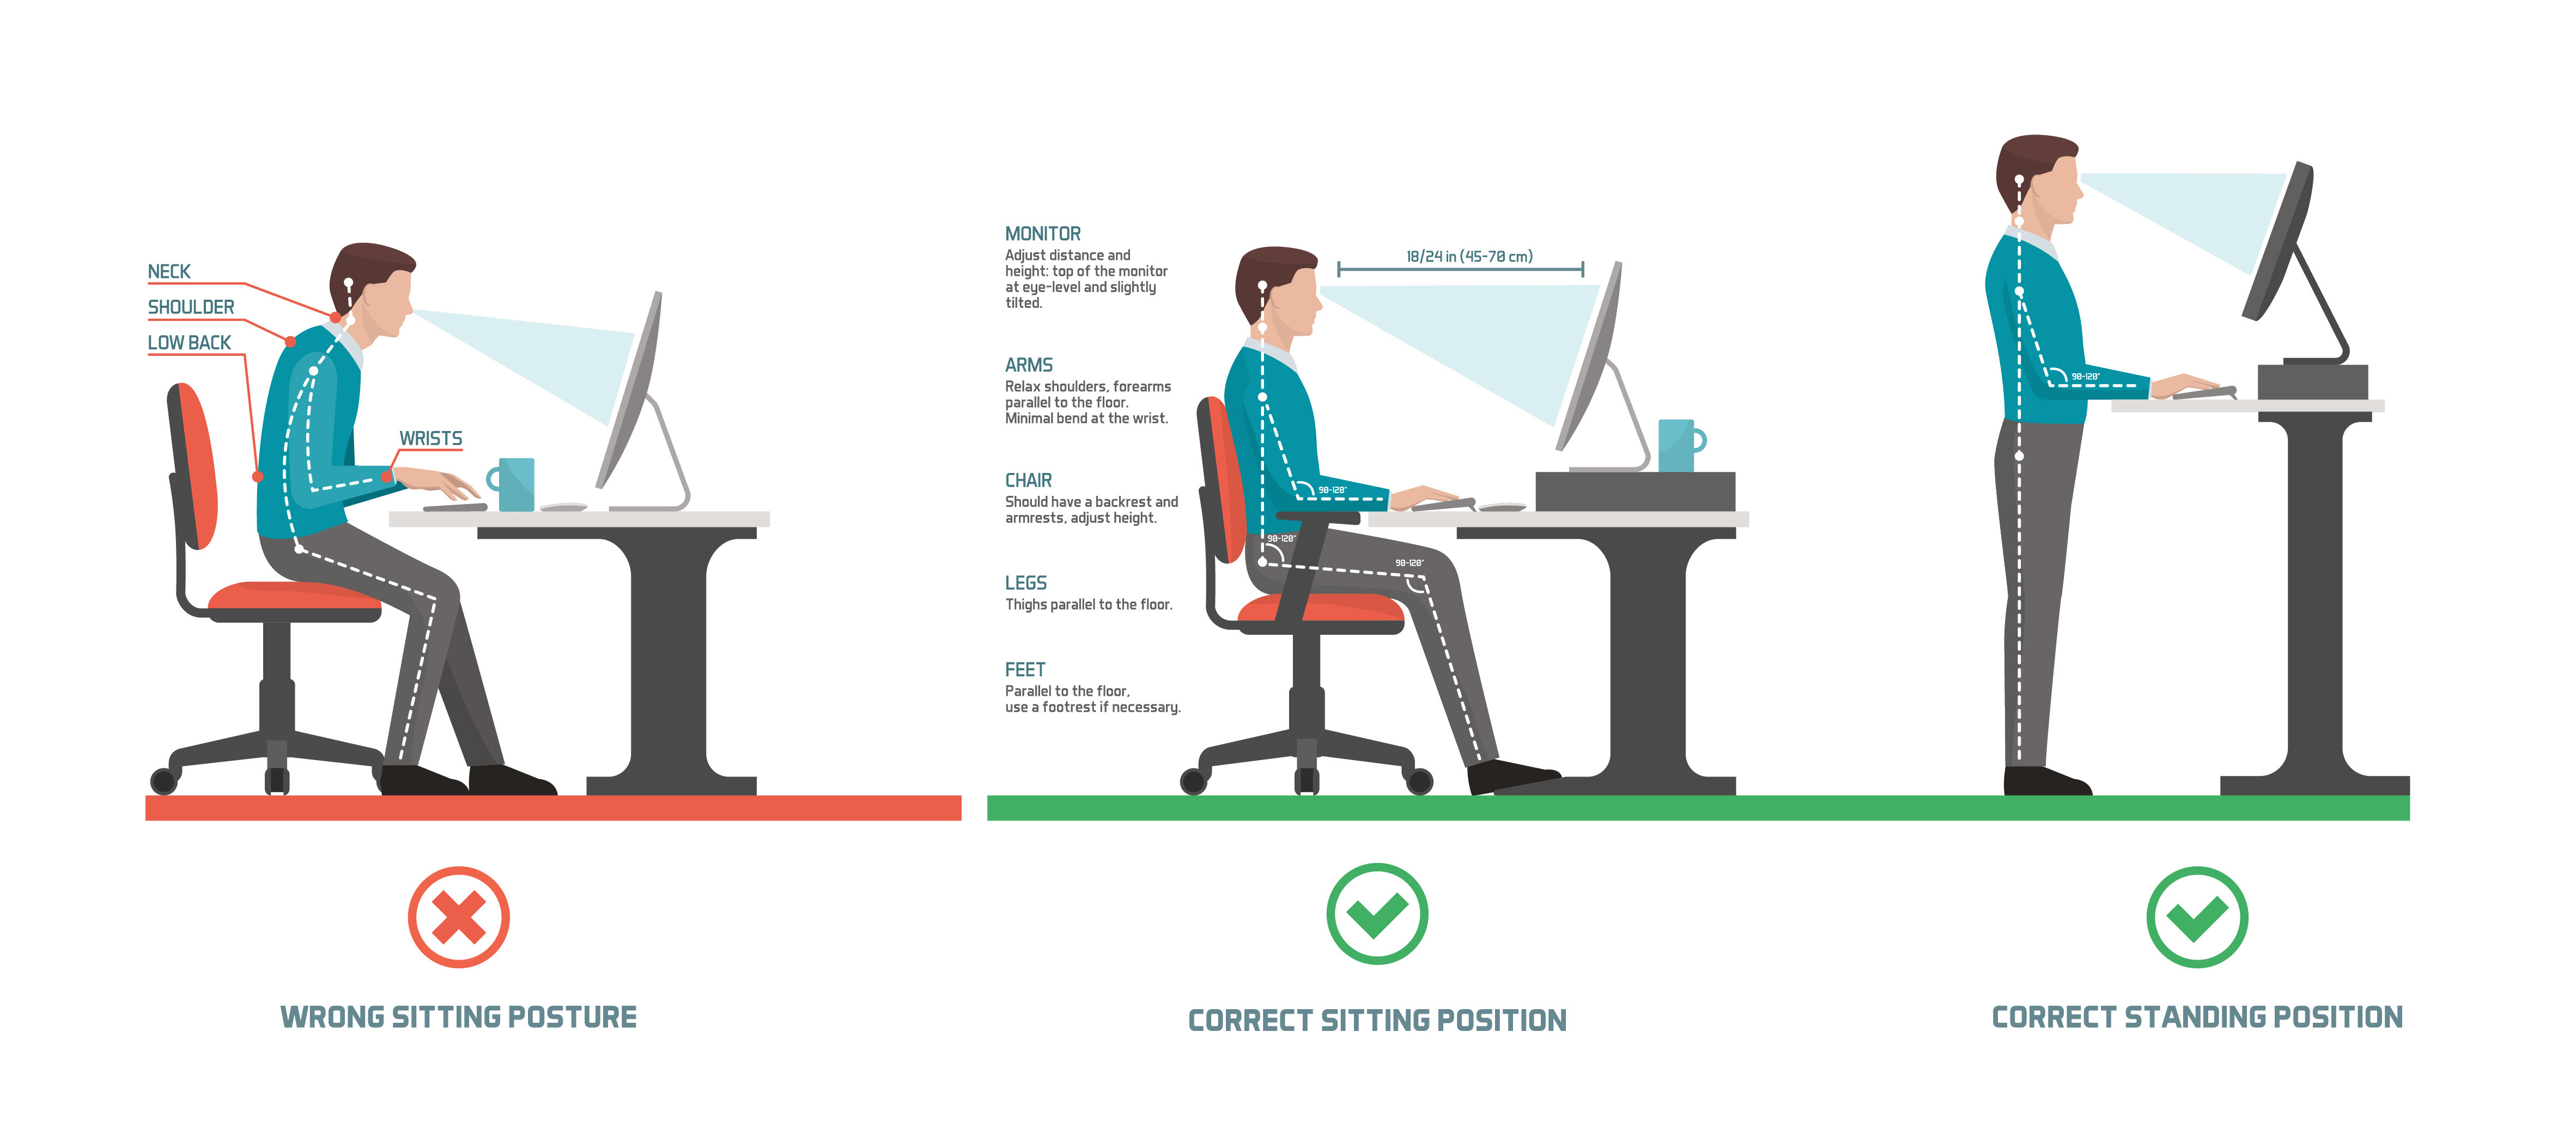 10 Tips For How To Improve Posture At Desk